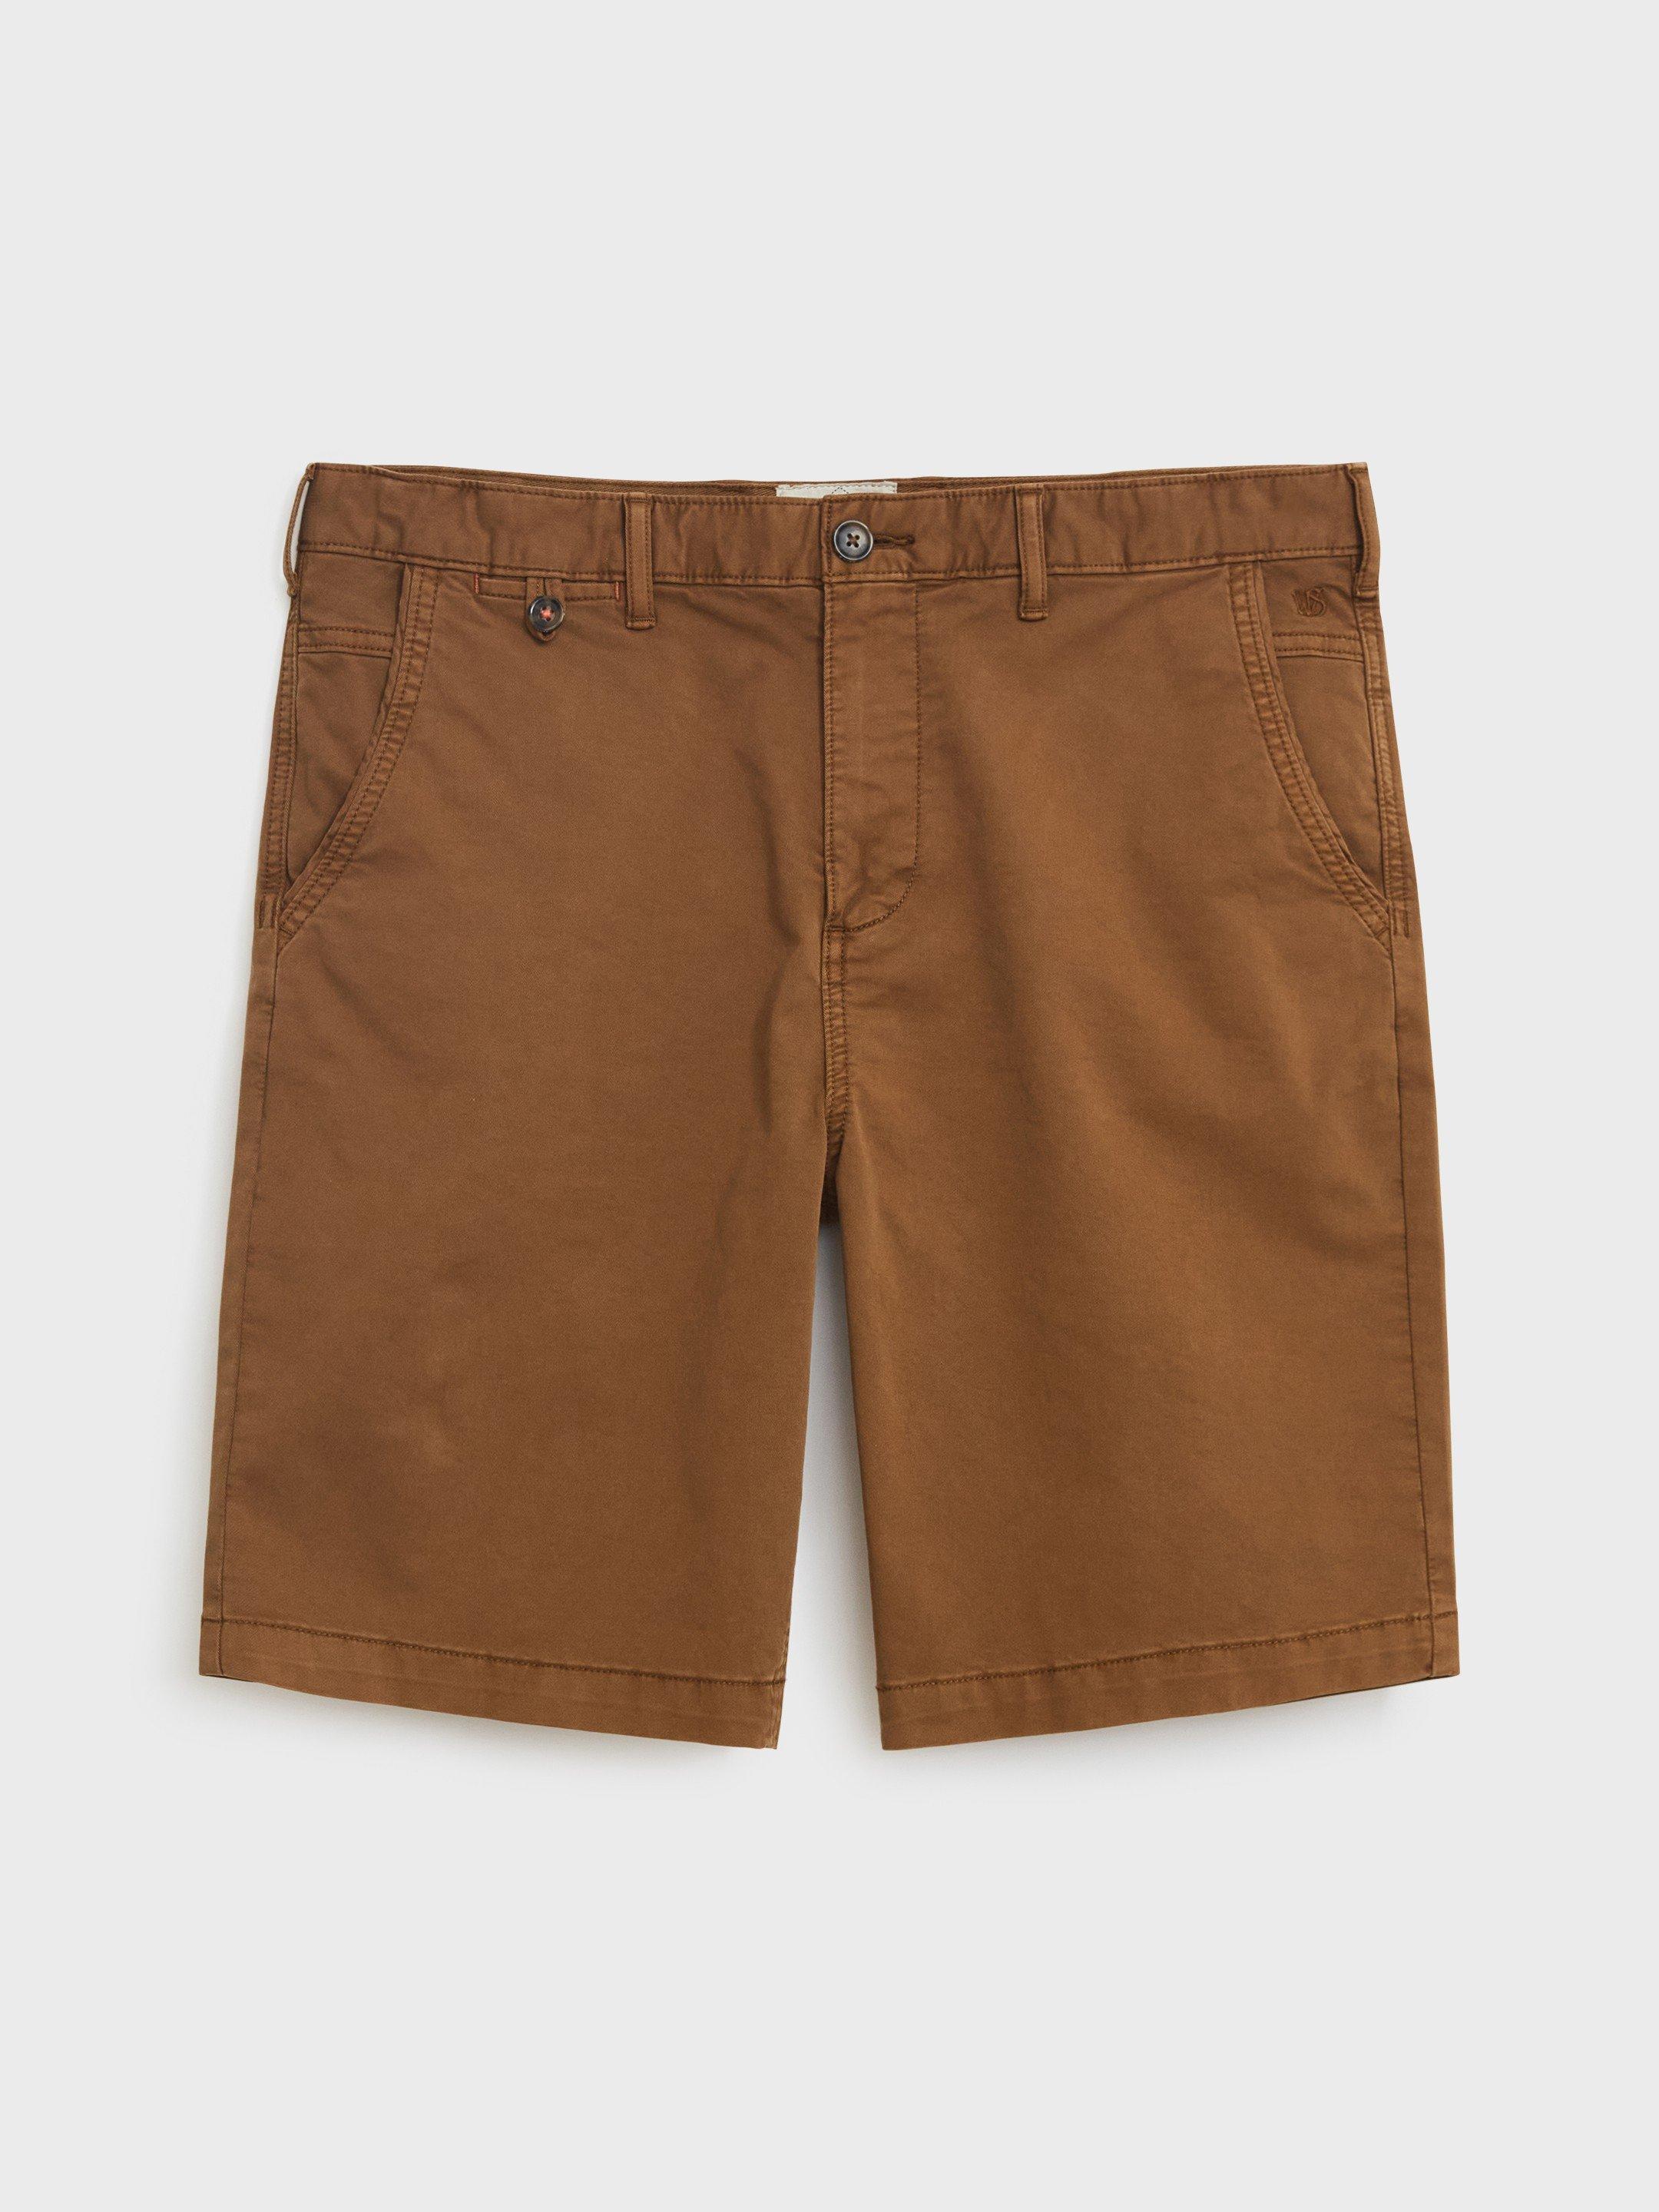 Sutton Organic Chino Shorts in MID BROWN - FLAT FRONT